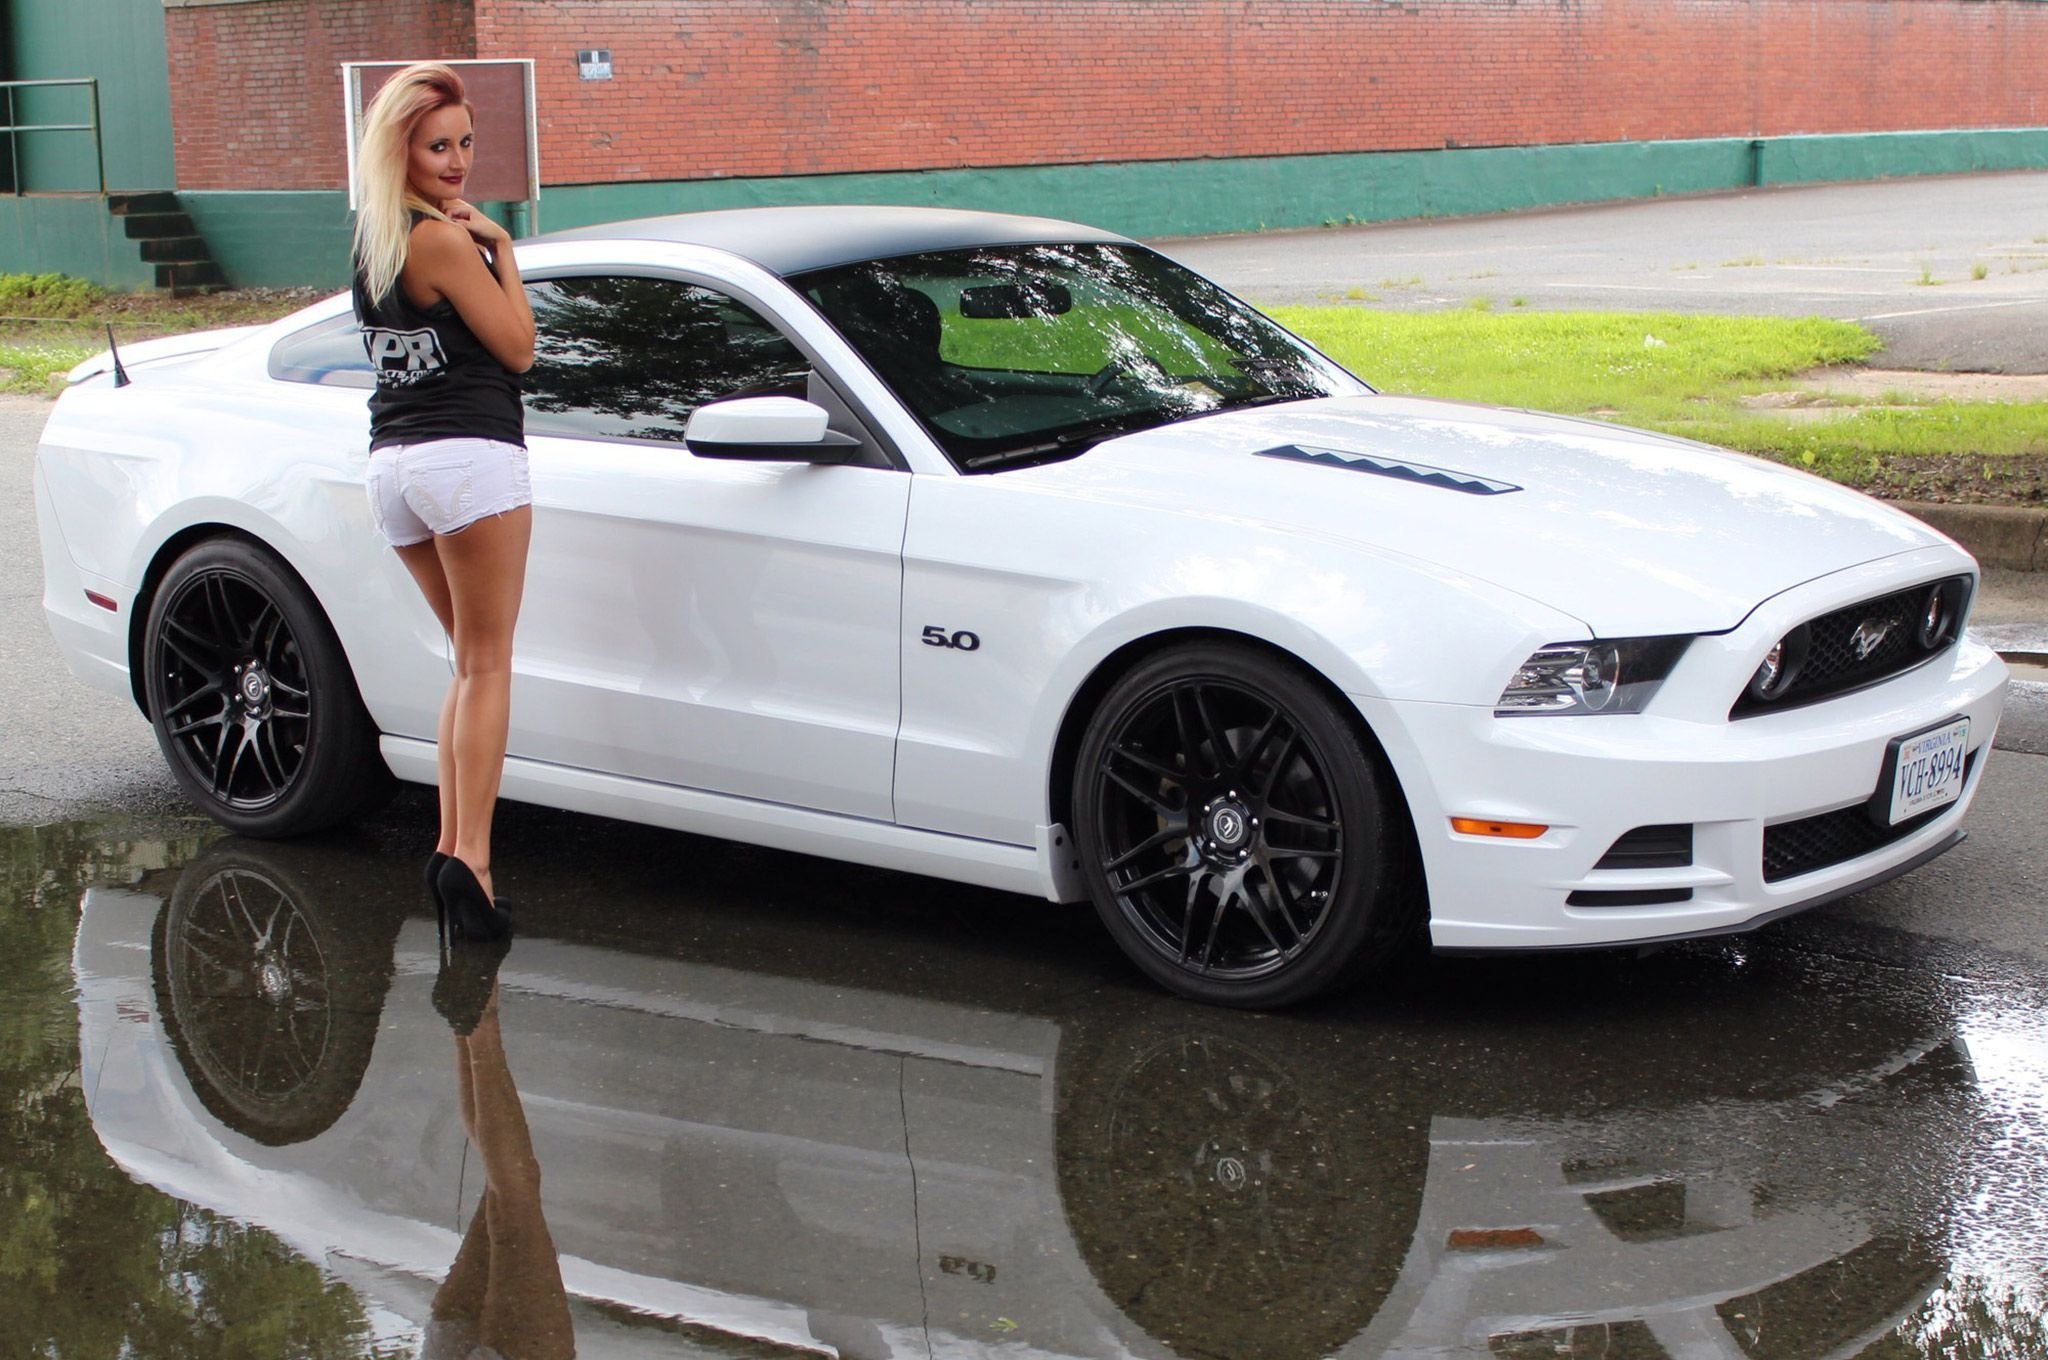 One of the girls streets white mustang. Девушки и Мустанг. Девушка в белом мустанге. Девушки и автомобили Ford Mustang. Красивые девушки с машиной Мустанг.